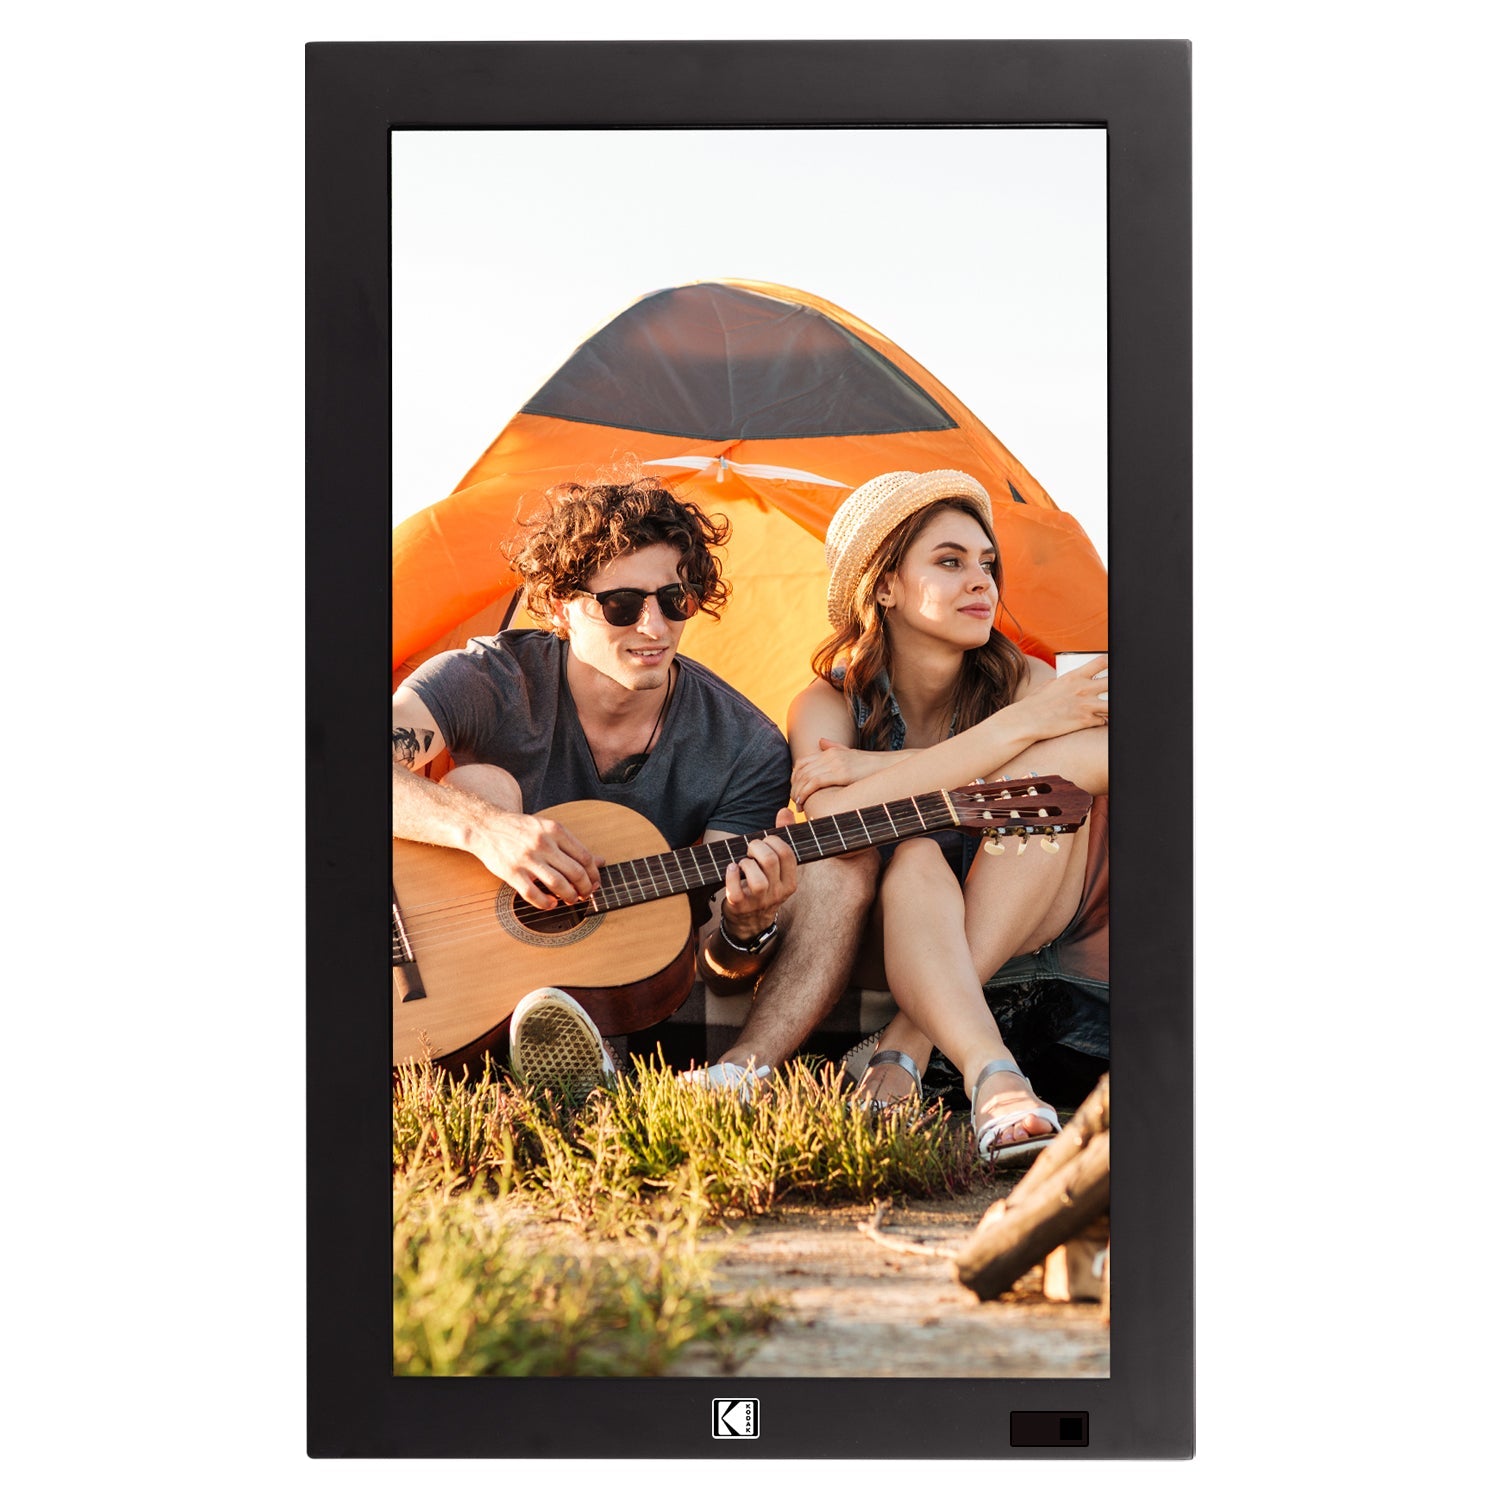 KODAK 17.3-inch Wi-Fi Enabled Digital Photo Frame WF173V, 32GB Internal Memory Wooden Frame with Photo, Video, Clock, Calendar, Weather and SD Card, USB and 3.5 Earphone Ports (Remote Control Incl.)